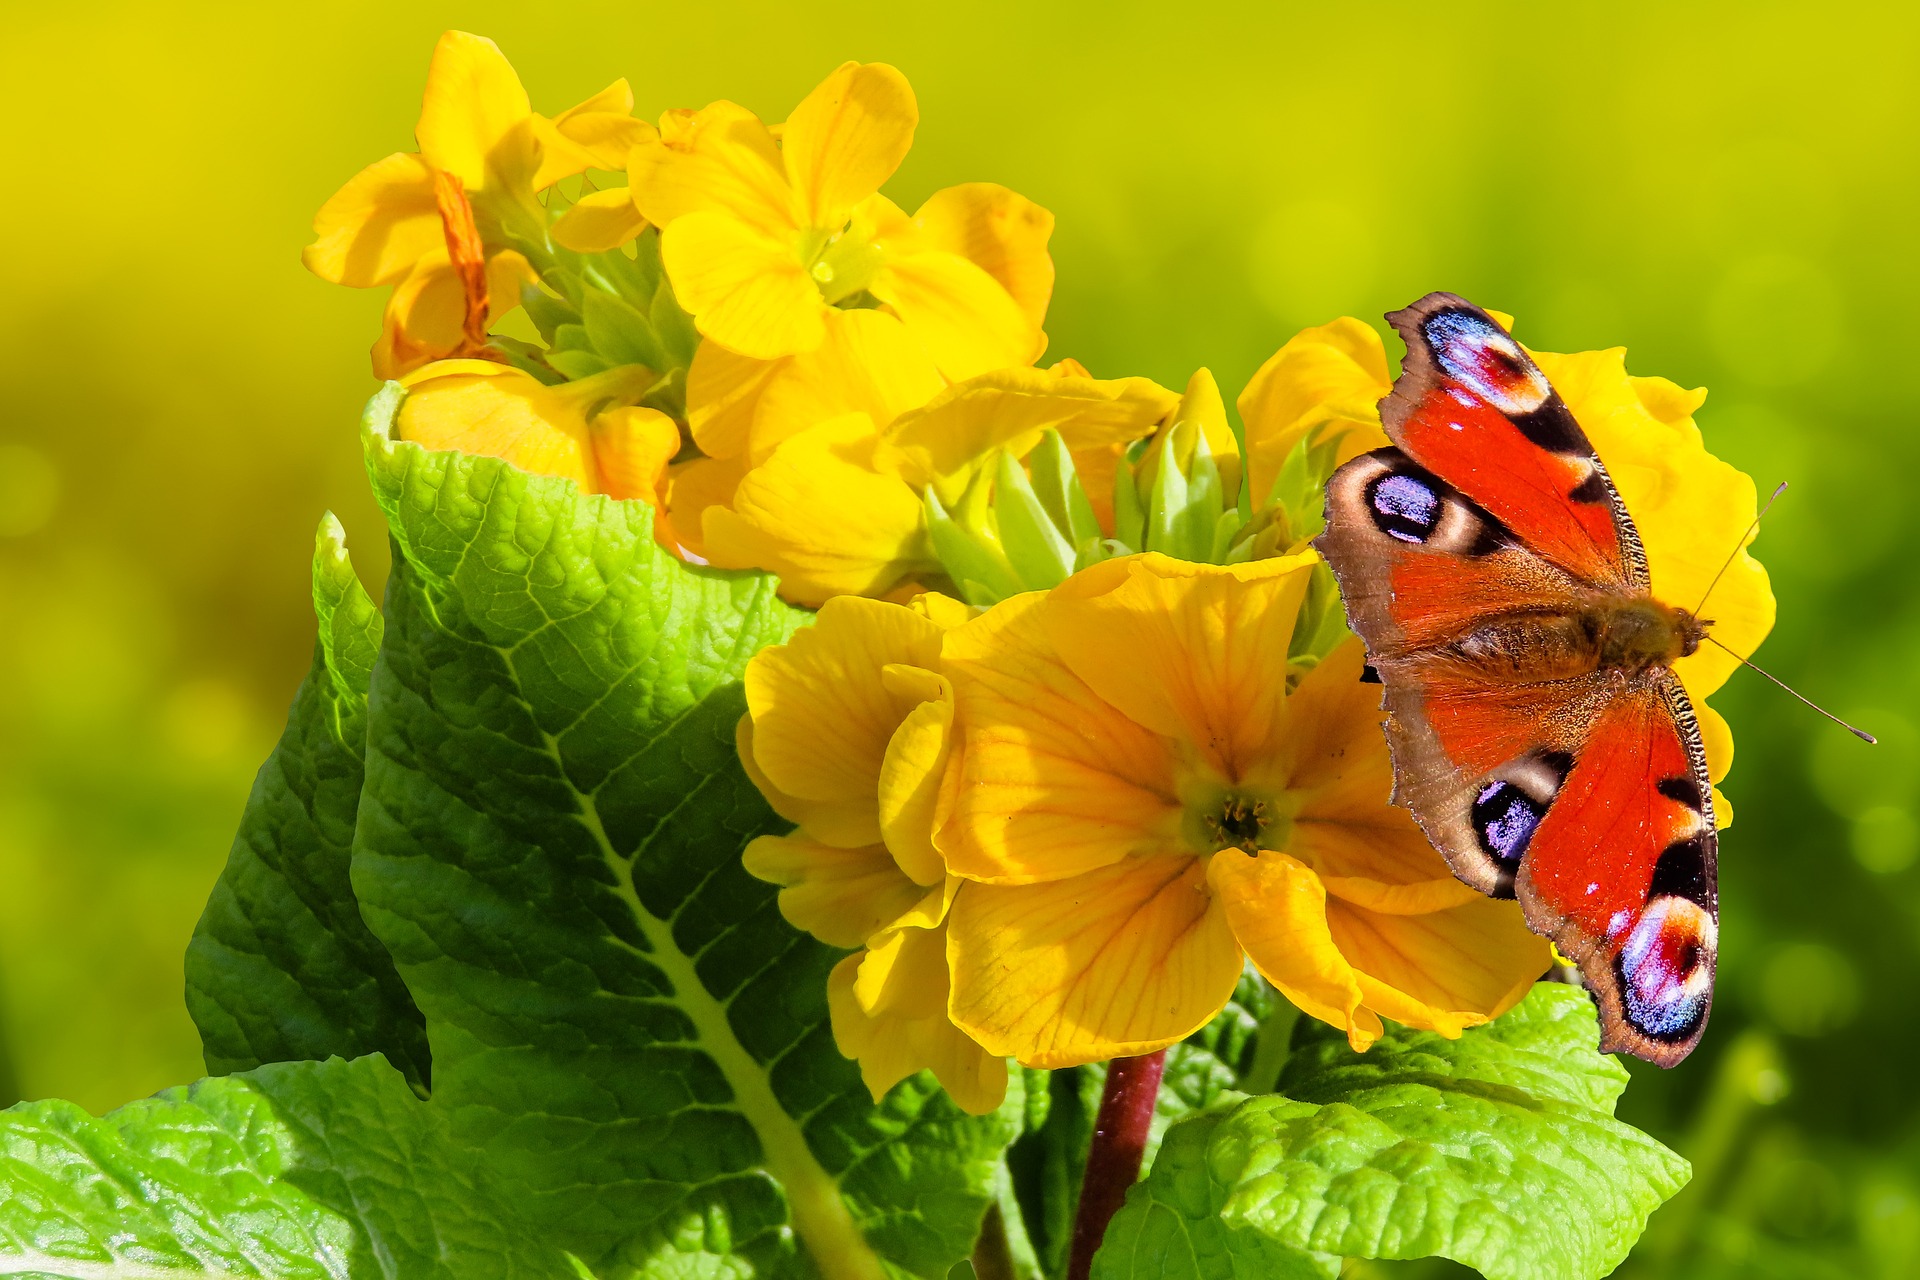 A butterfly sipping nectar from a primrose flower